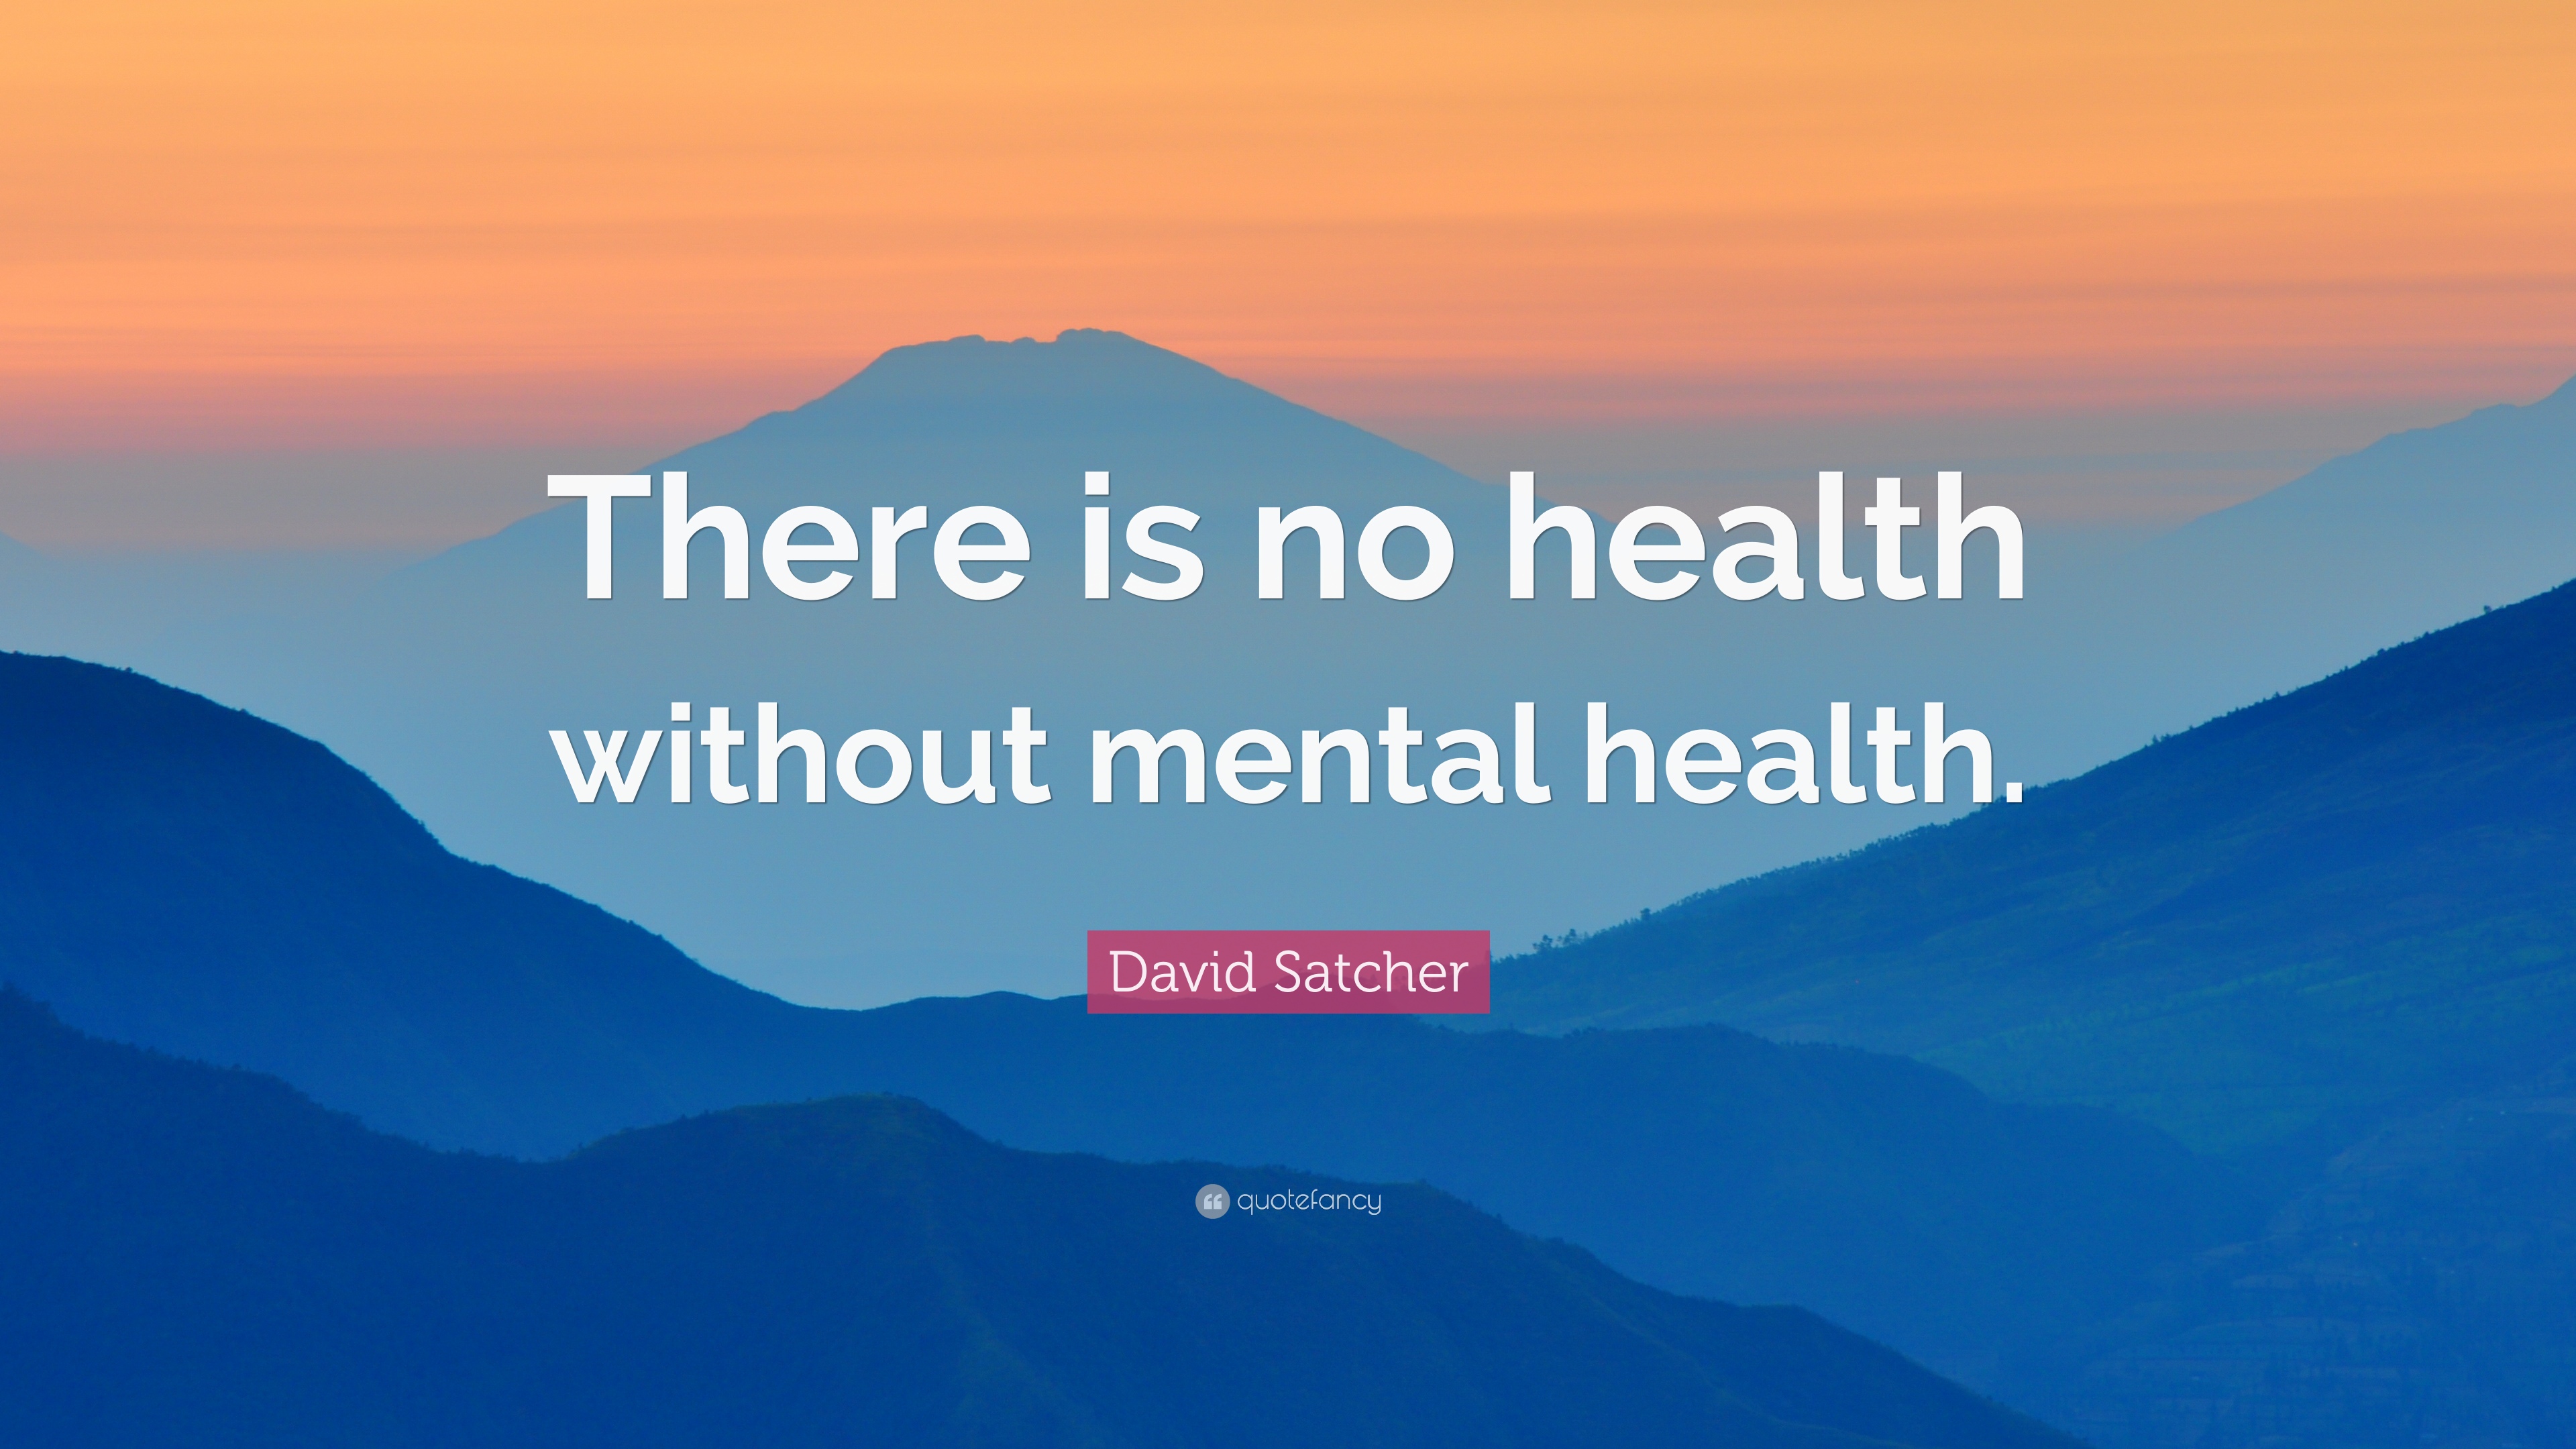 David Satcher Quote: “There is no health without mental